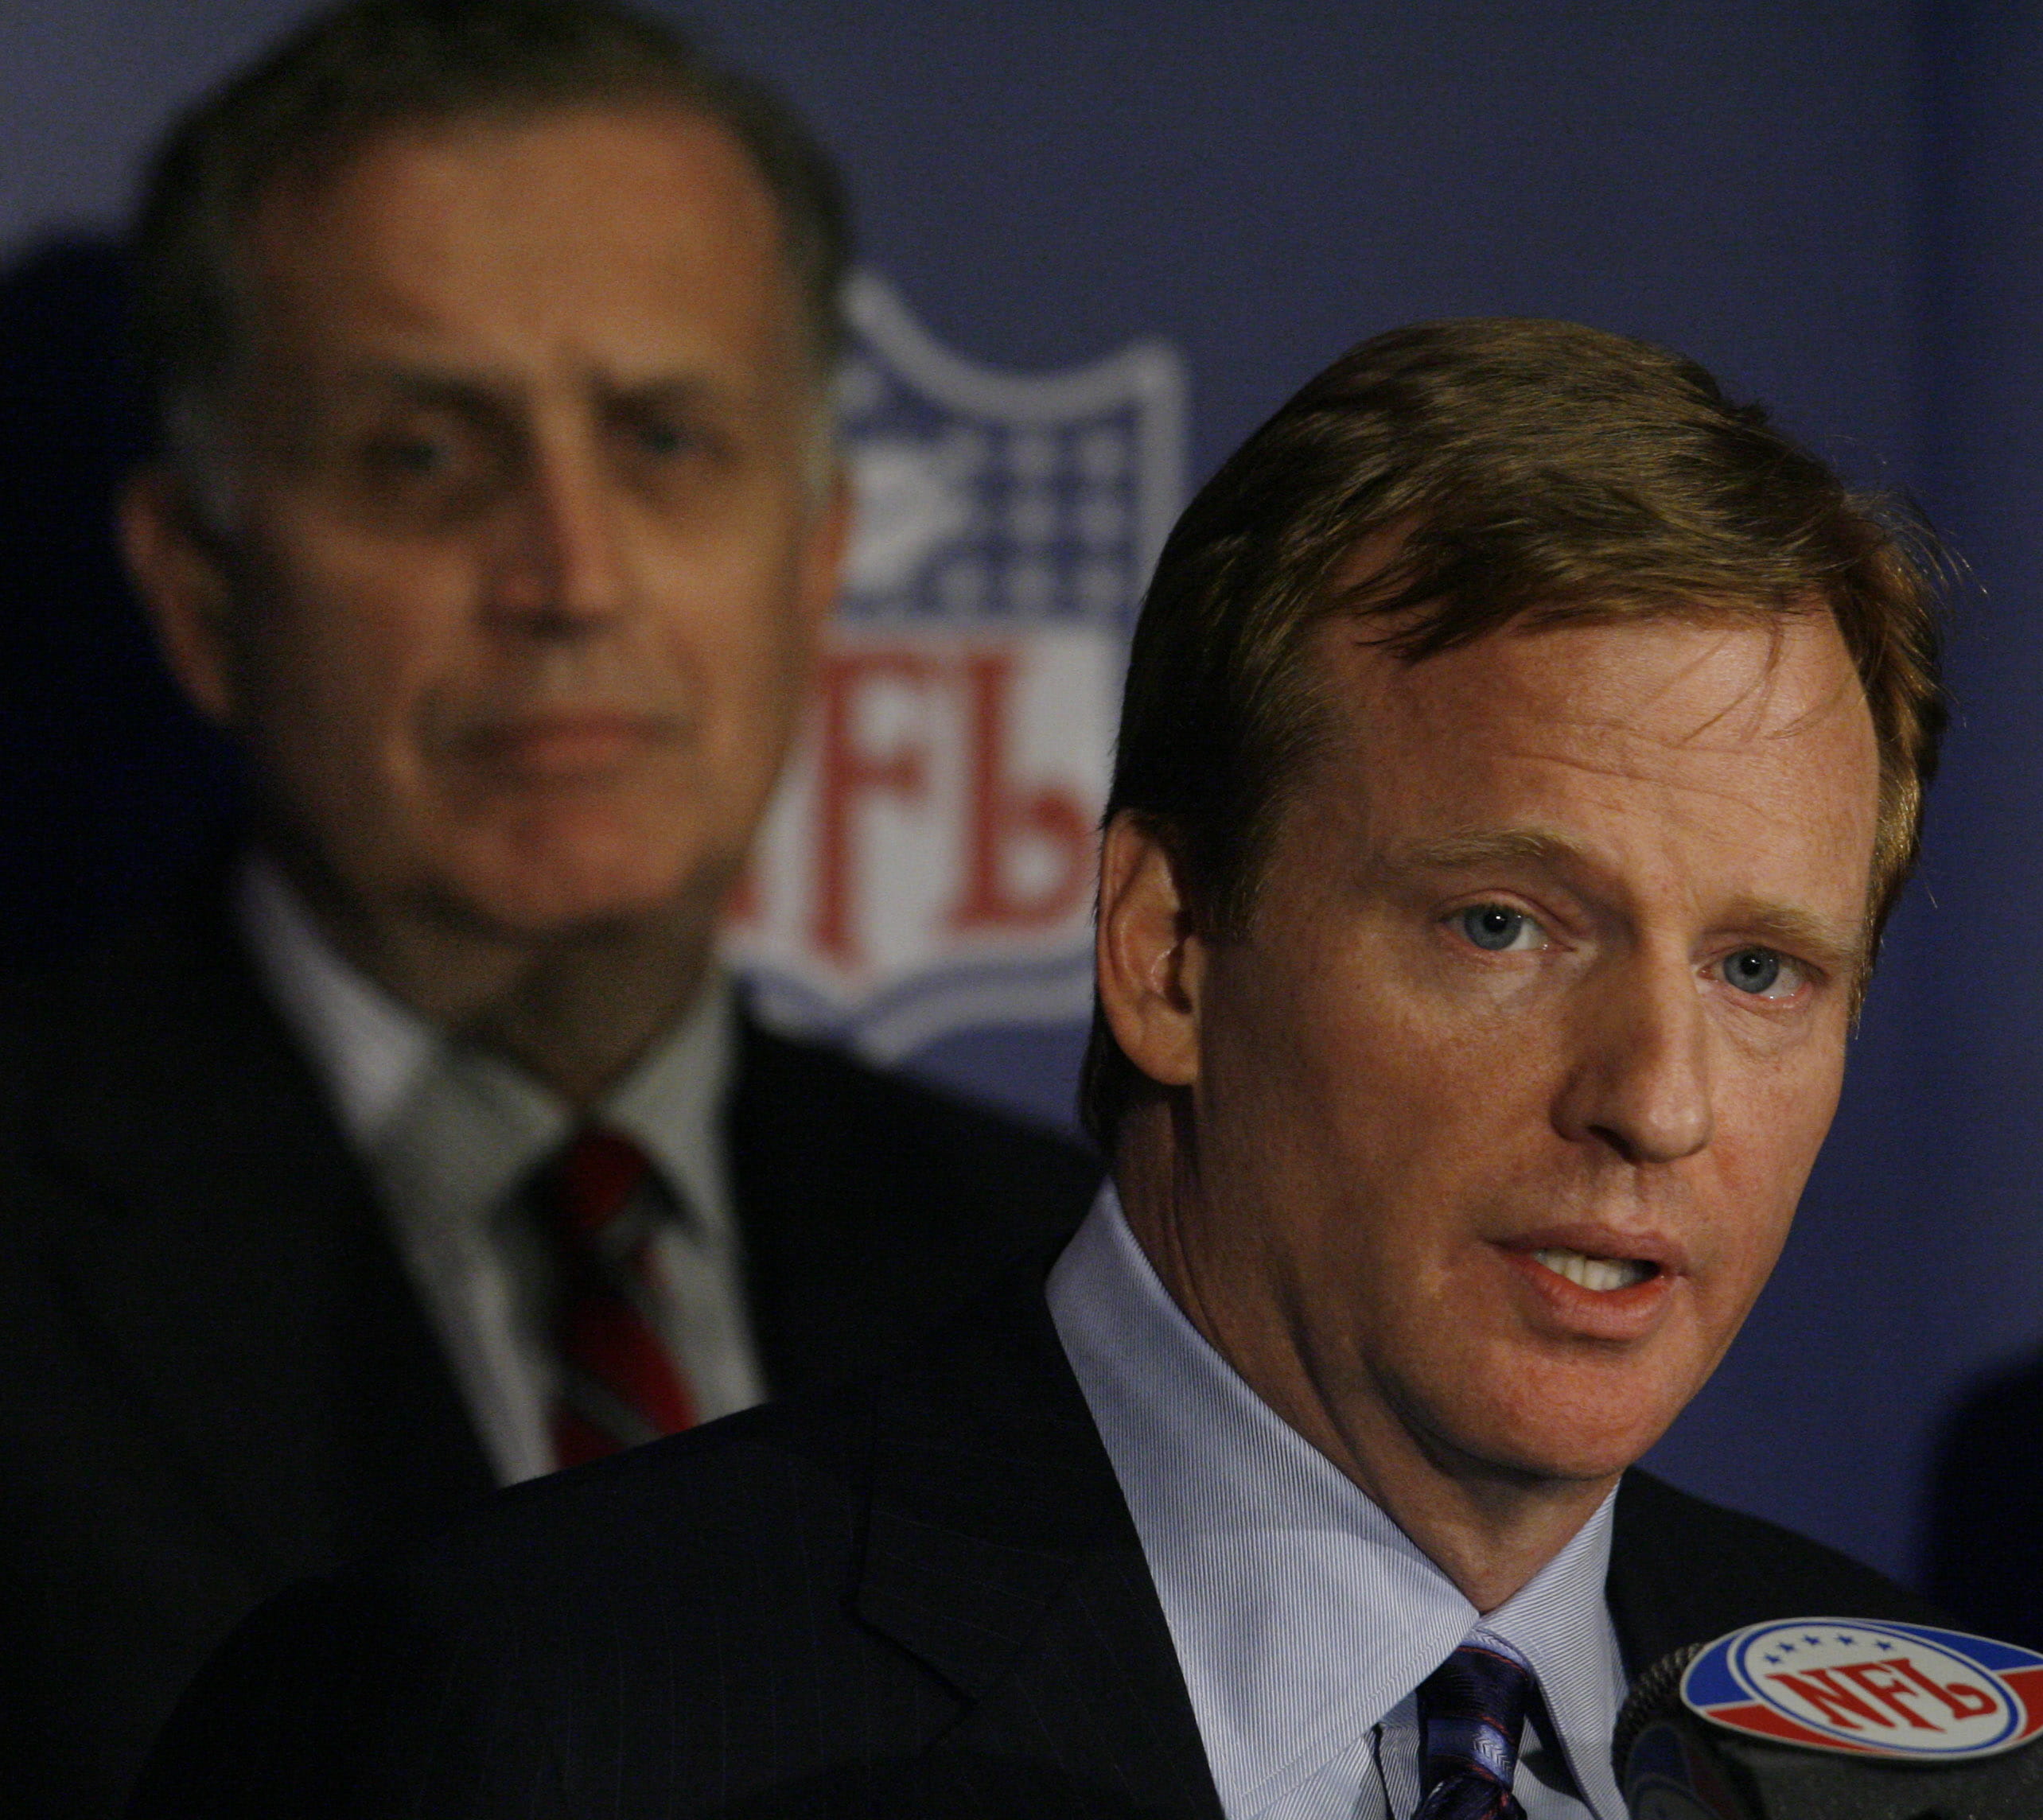 Roger Goodell speaks during a news conference in August 2006.